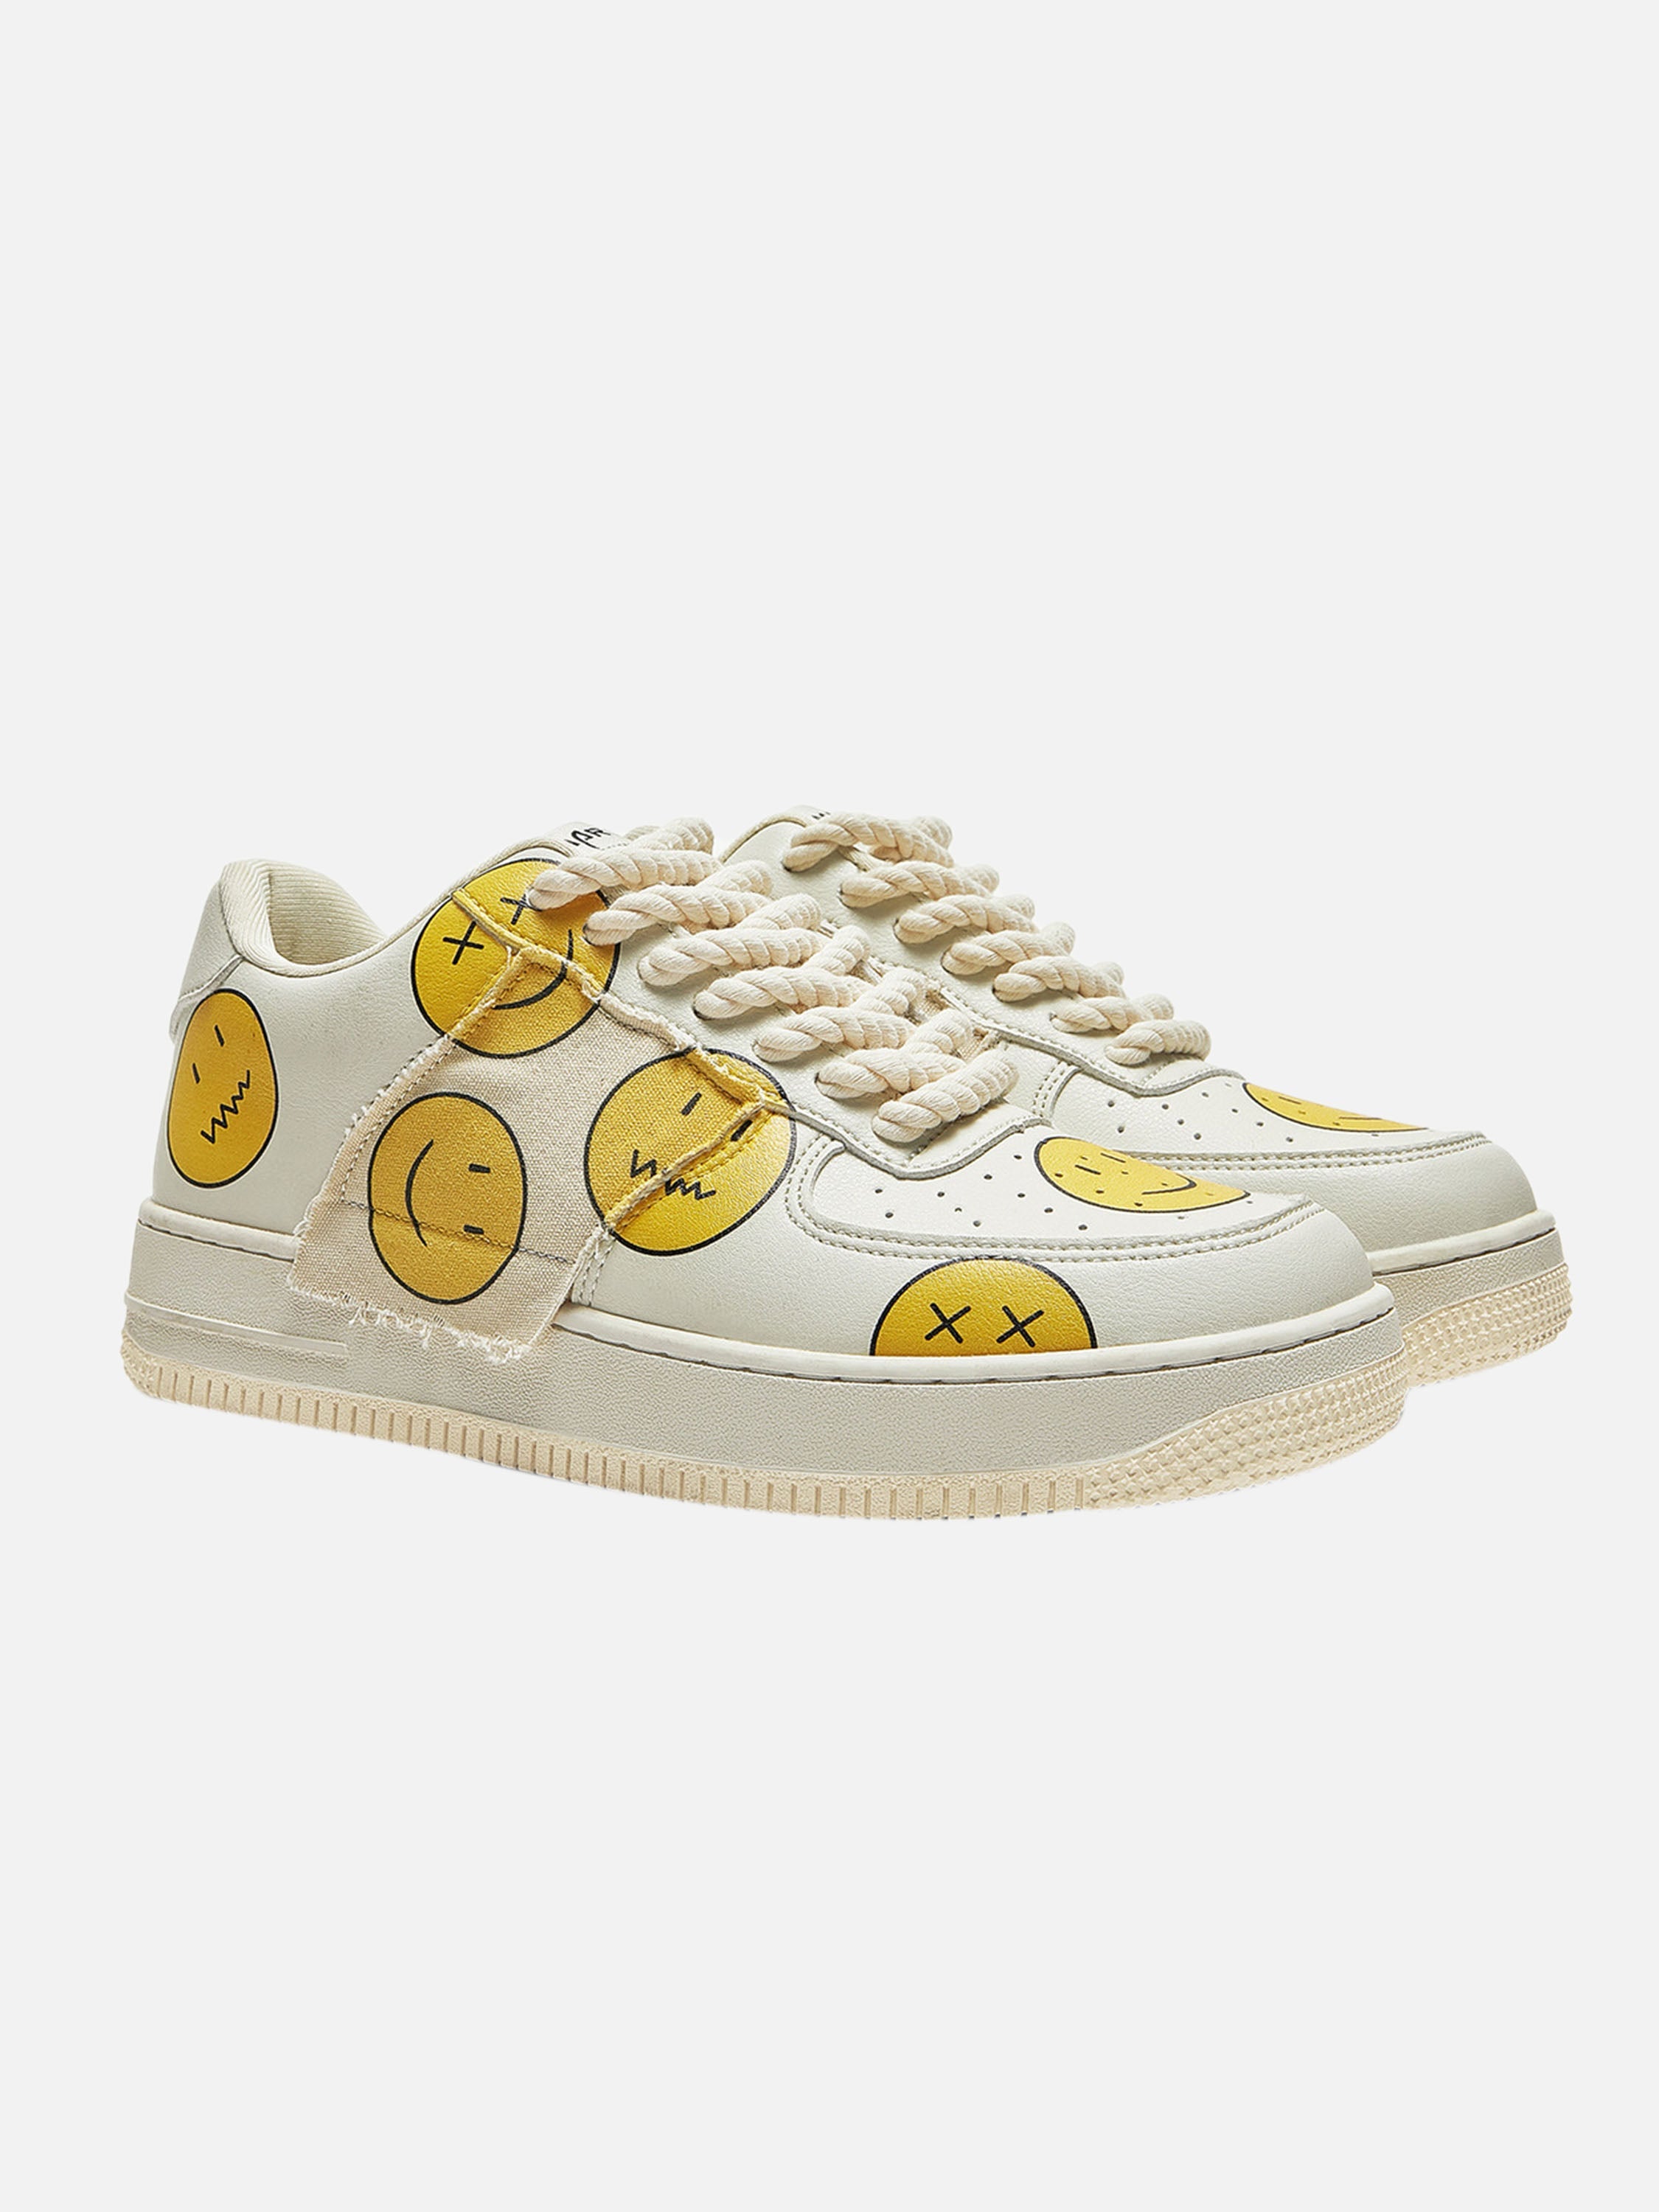 American Fun Smiley Face Expression Board Shoes - 23345